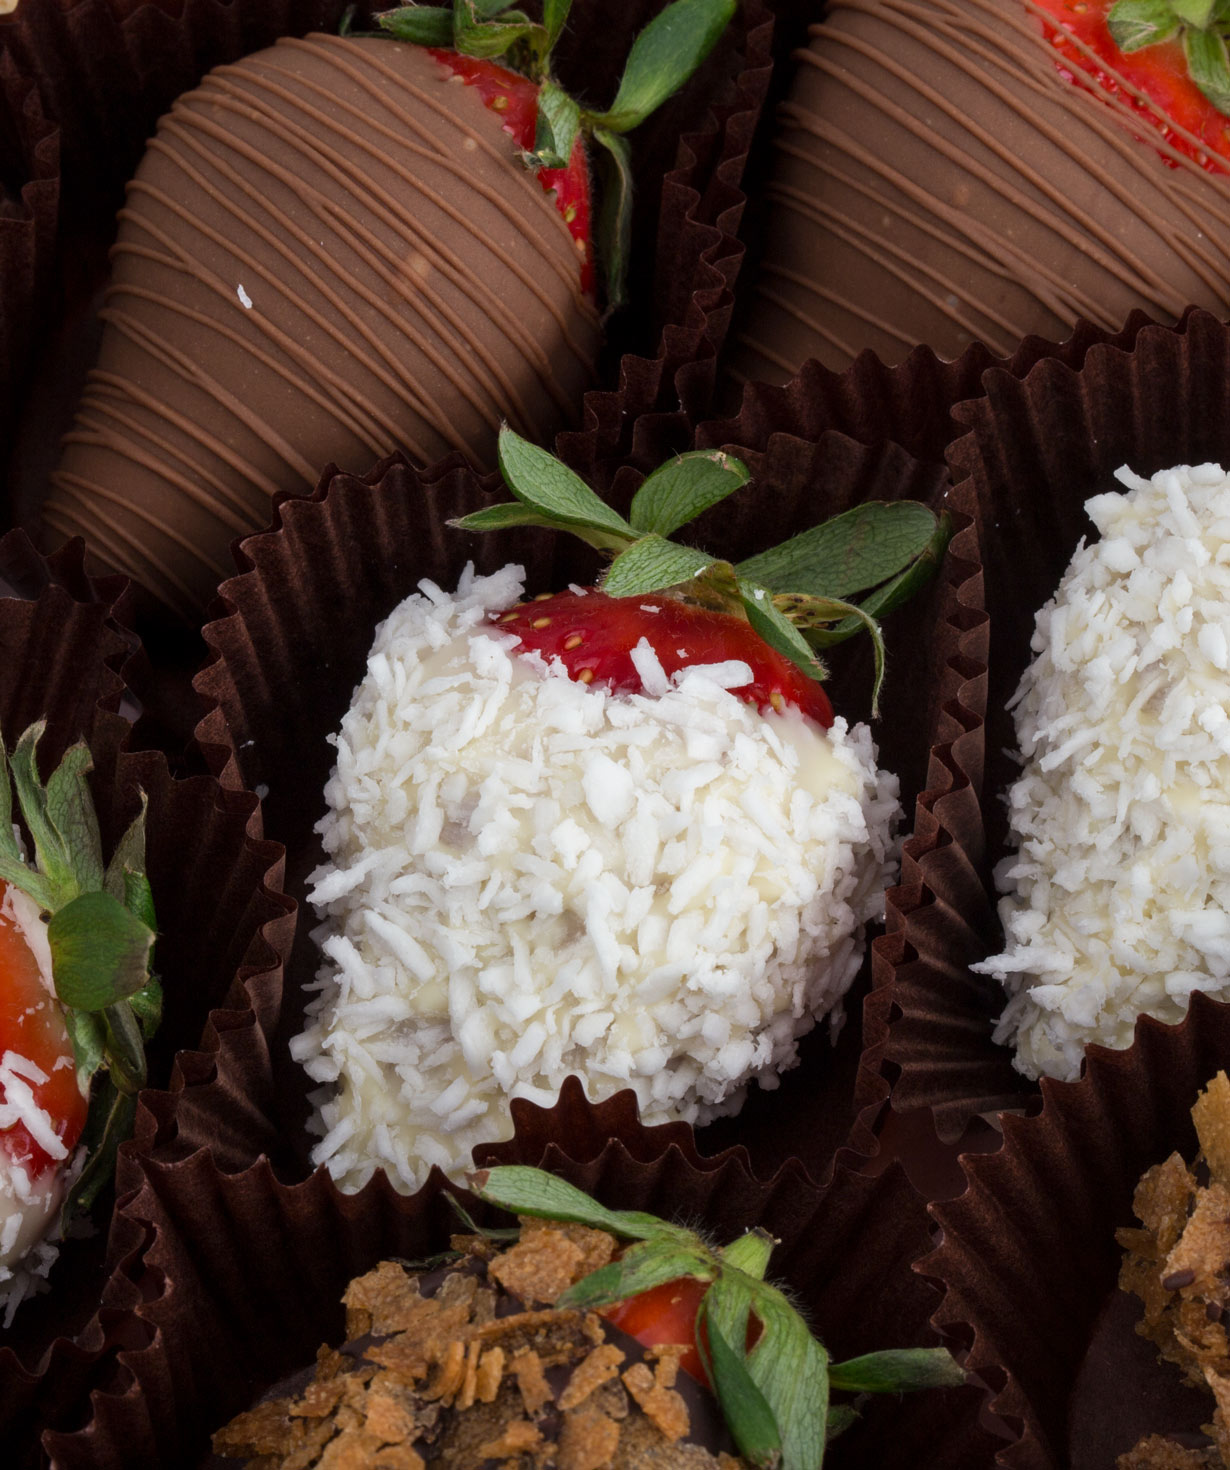 Strawberry `Theobroma` in chocolate with different flavors